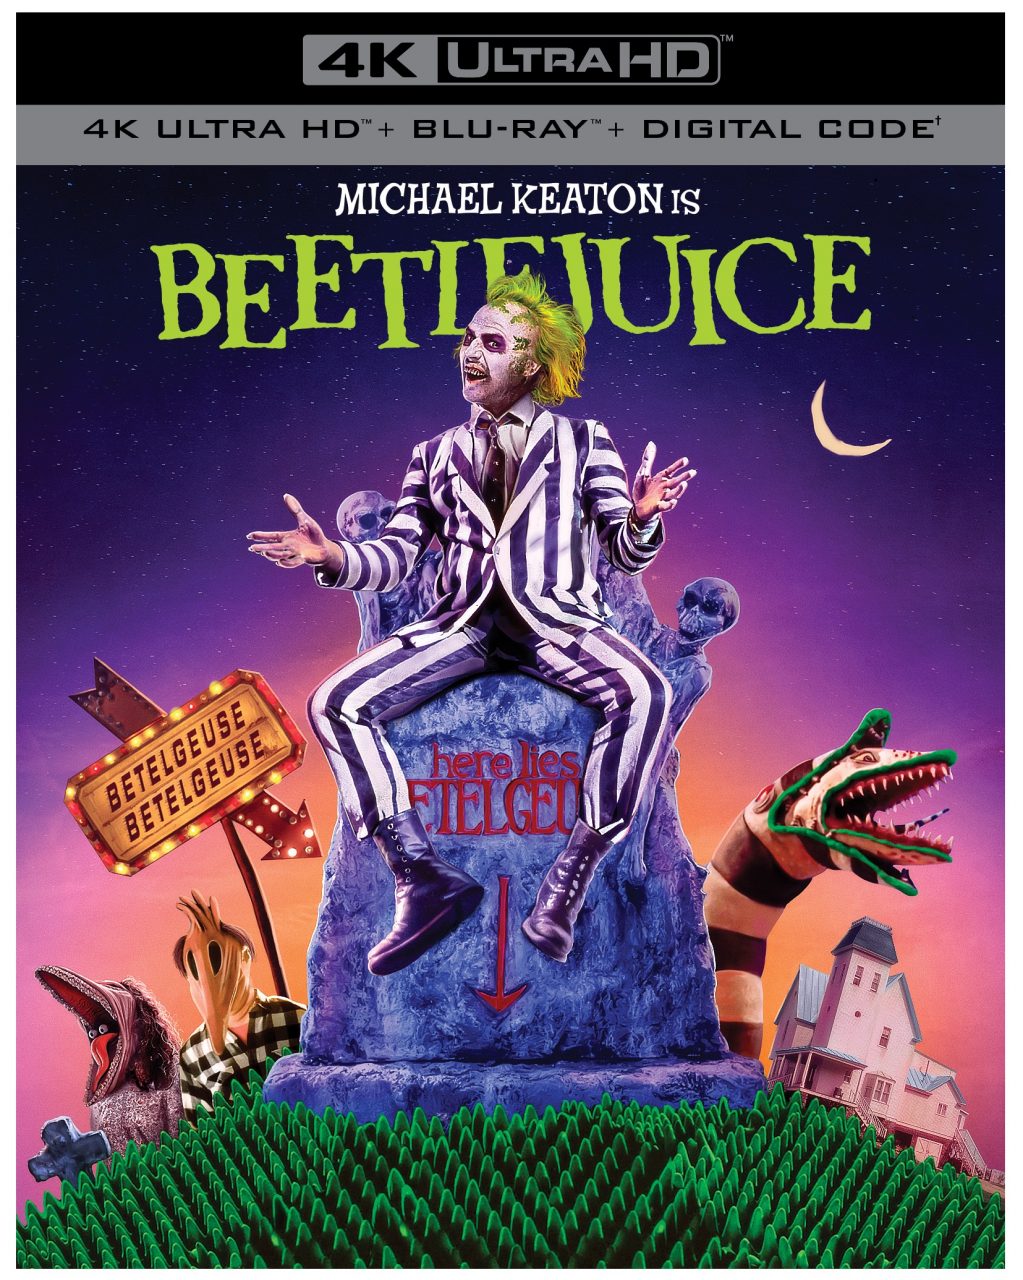 Beetlejuice 4K Ultra HD Combo Pack cover (Warner Bros. Home Entertainment)